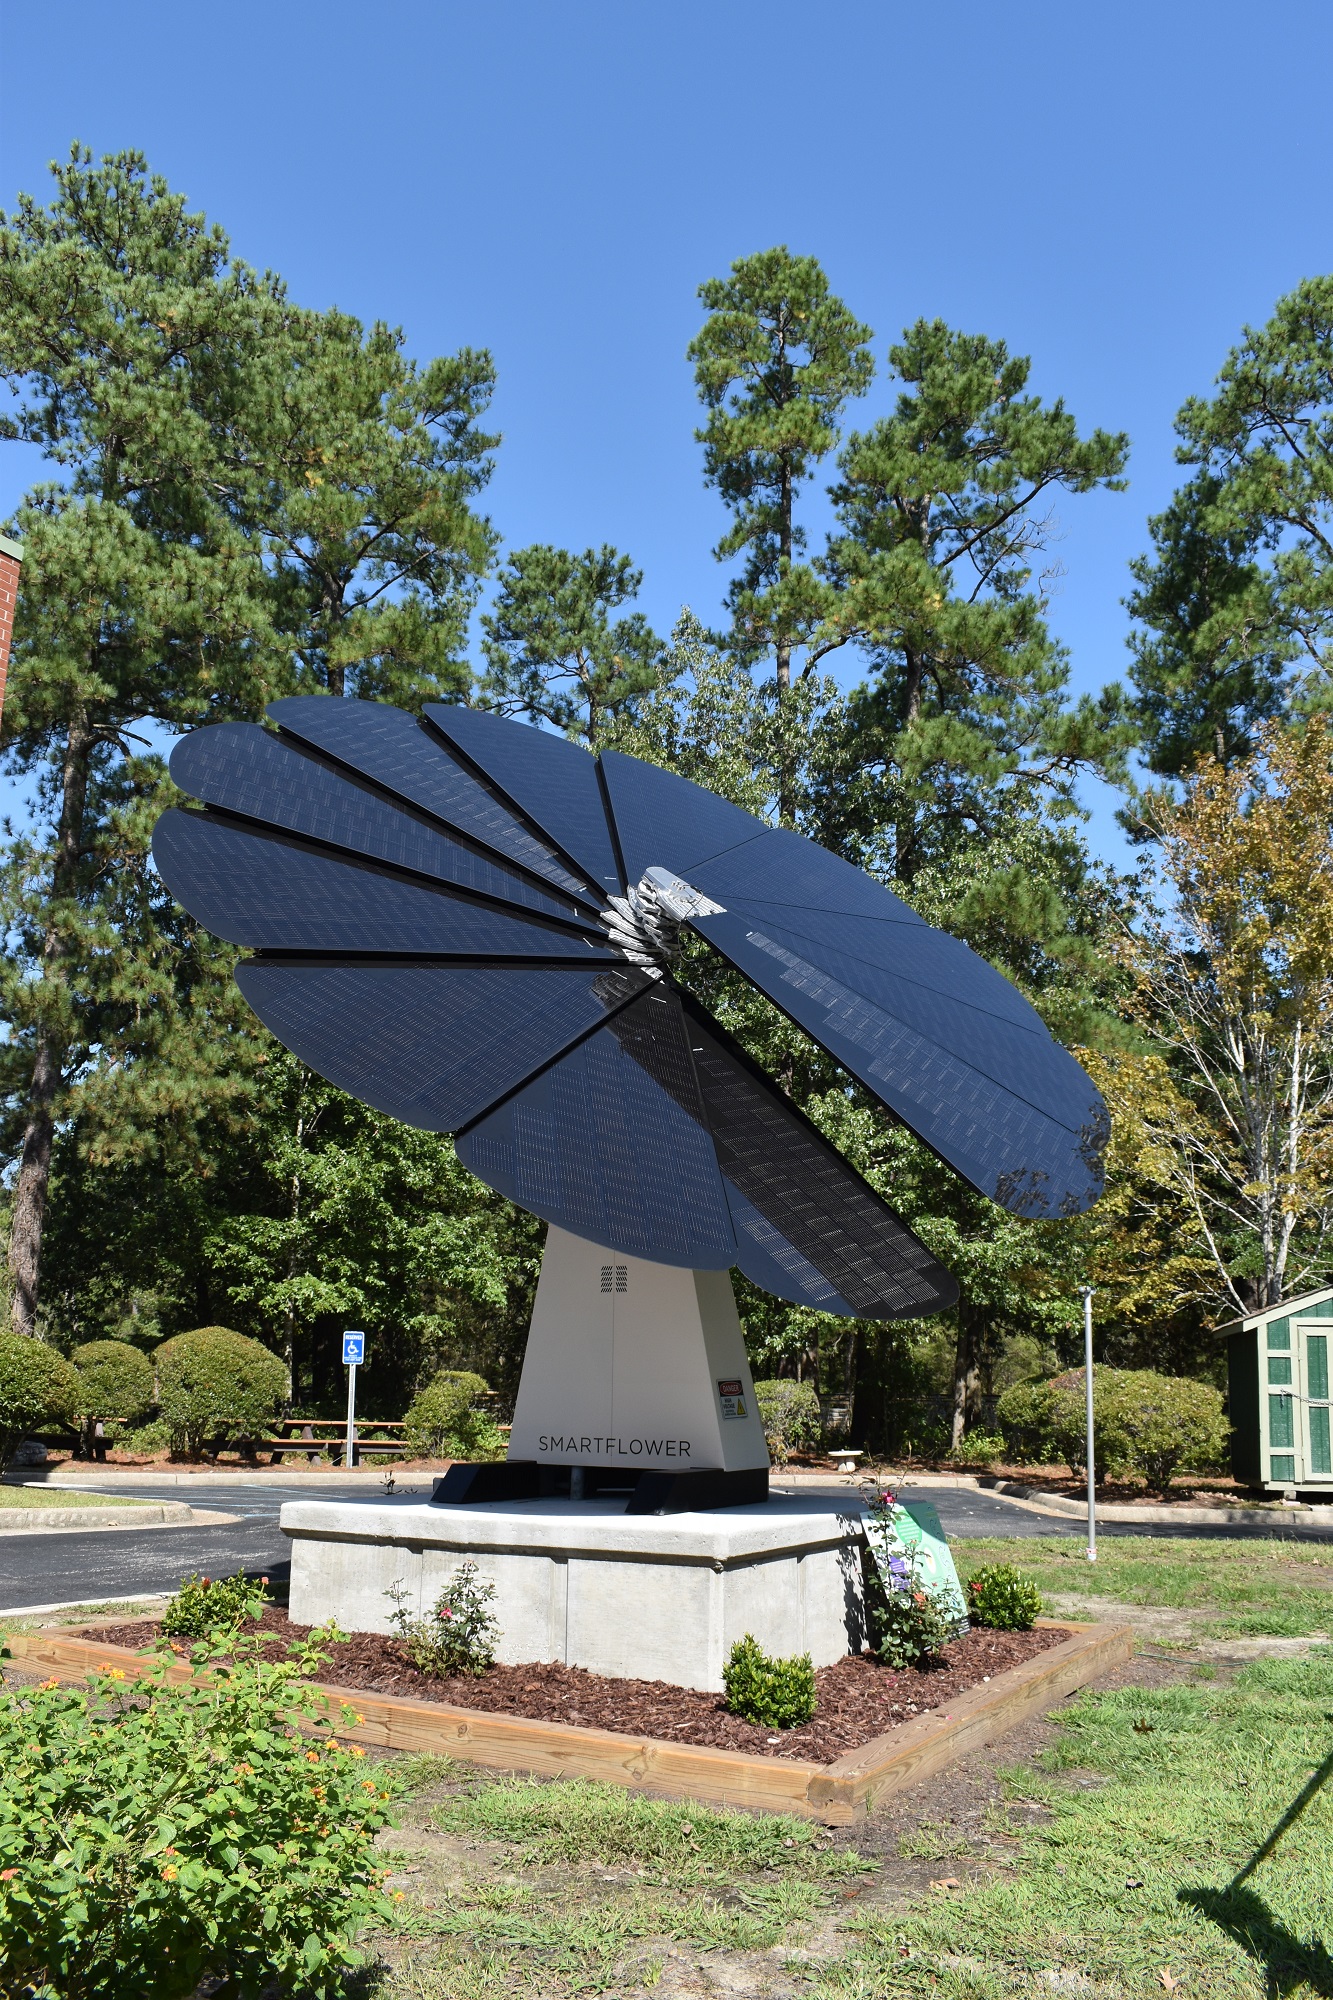 Named after Girl Scouts’ Founder, Juliette Gordon Low, whose nickname was Daisy, our SmartFlower uses advanced robotics and automation to track the sun, making up to 40% more energy than traditional stationary solar panels. This installation is part of our Council’s promise to the environment, promoting initiatives that contribute to sustainability, efficient use of energy, and reduced electrical consumption. Daisy was dedicated during a ceremony at her home, A Place for Girls, on October 2, 2023.